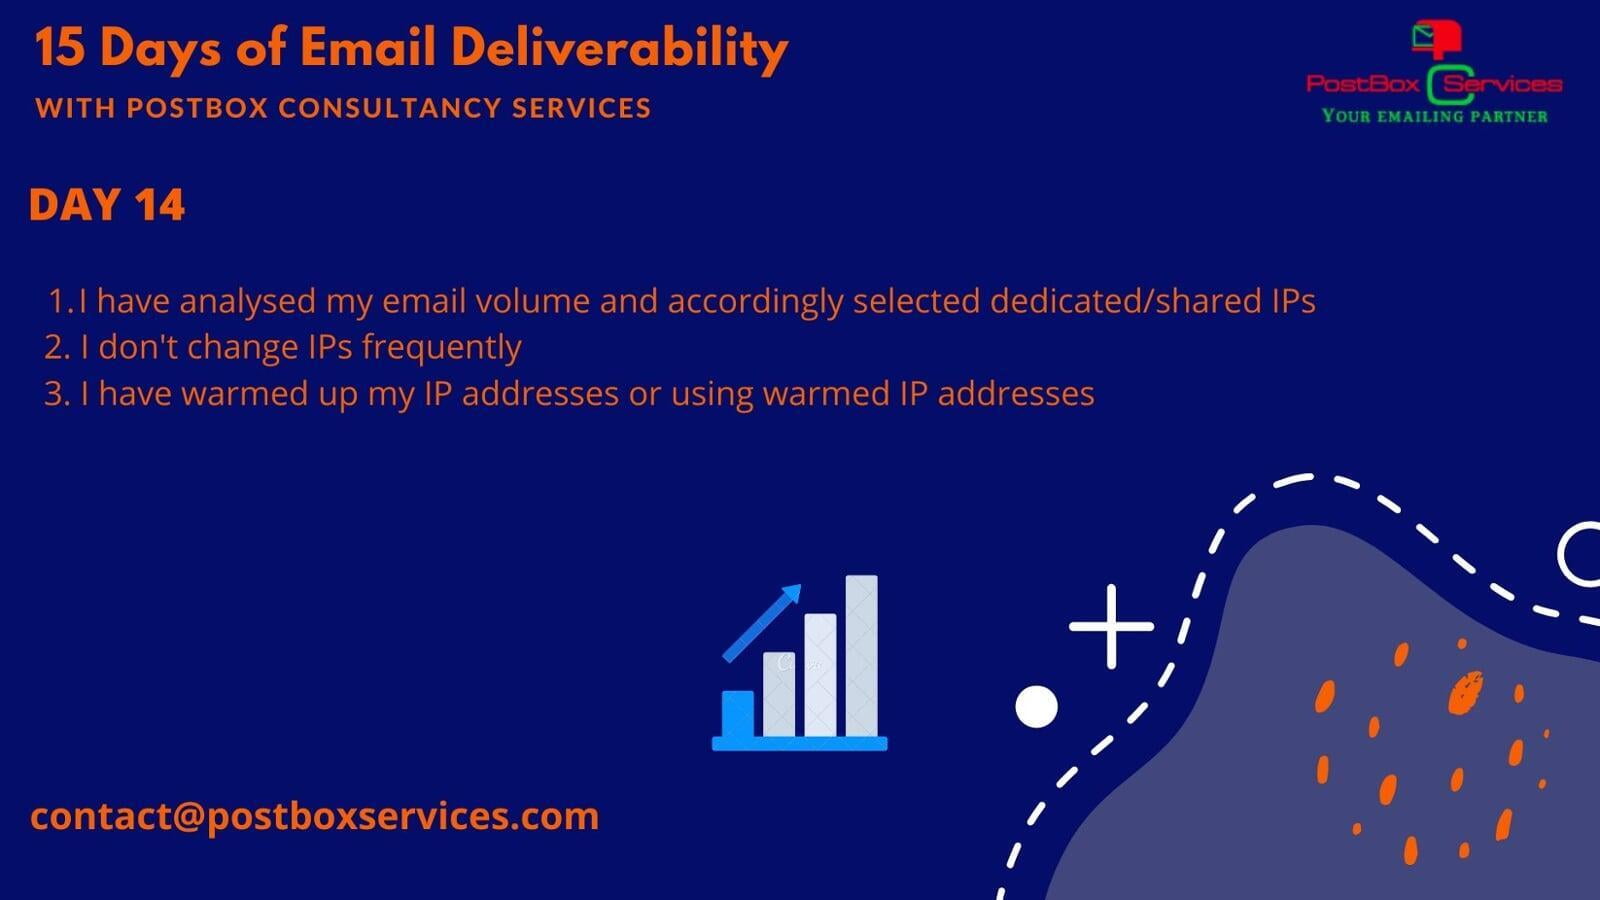 Day 14 Email Deliverability